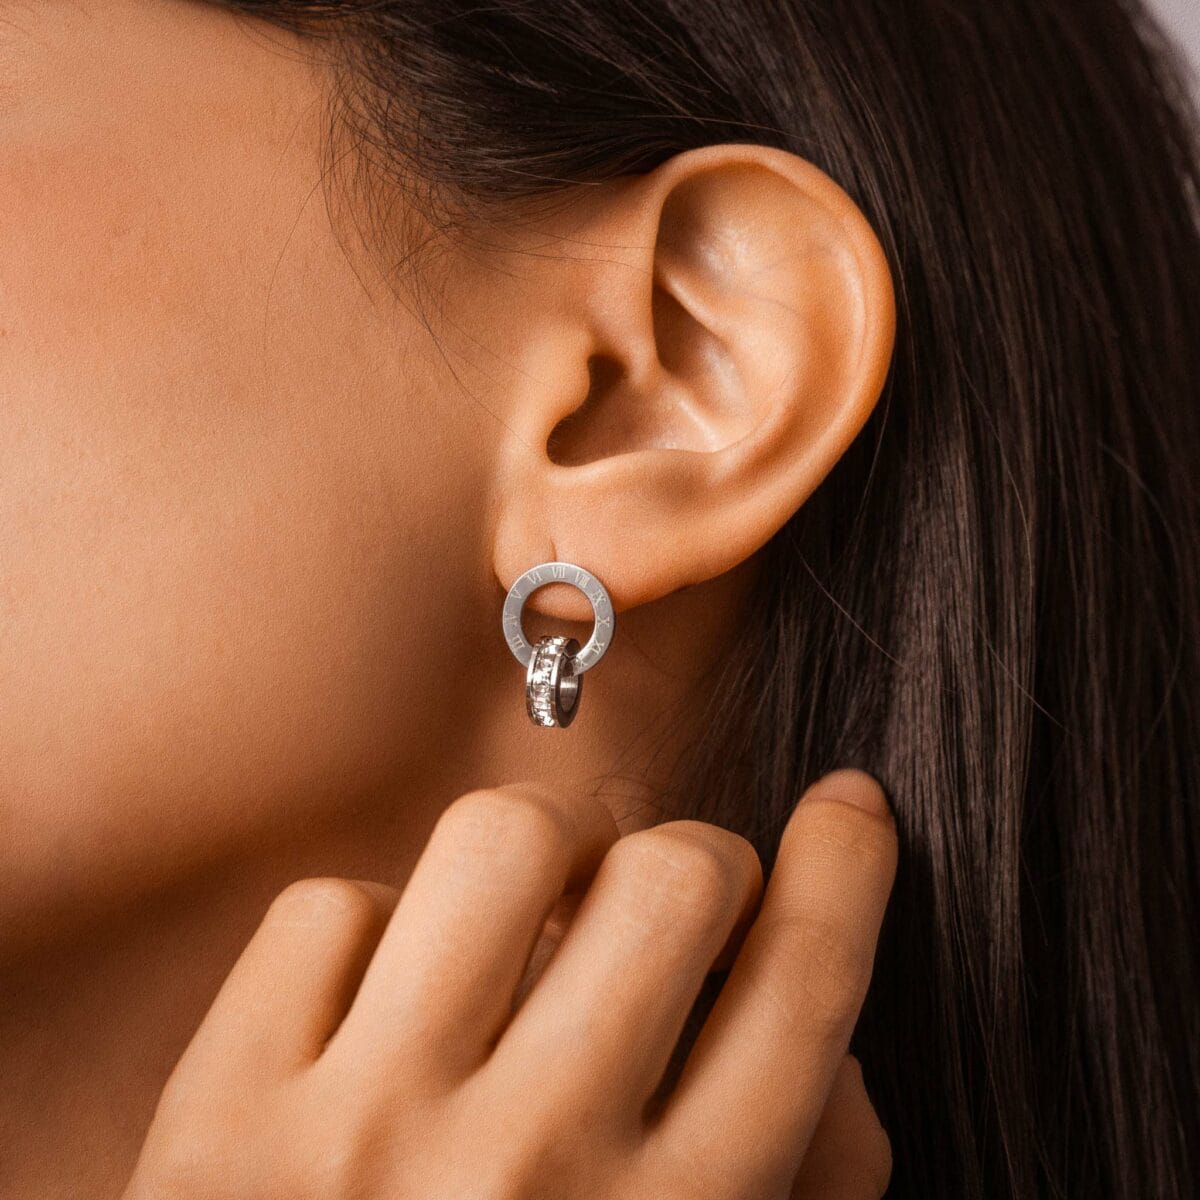 https://m.clubbella.co/product/roma/ Roma earrings (2)